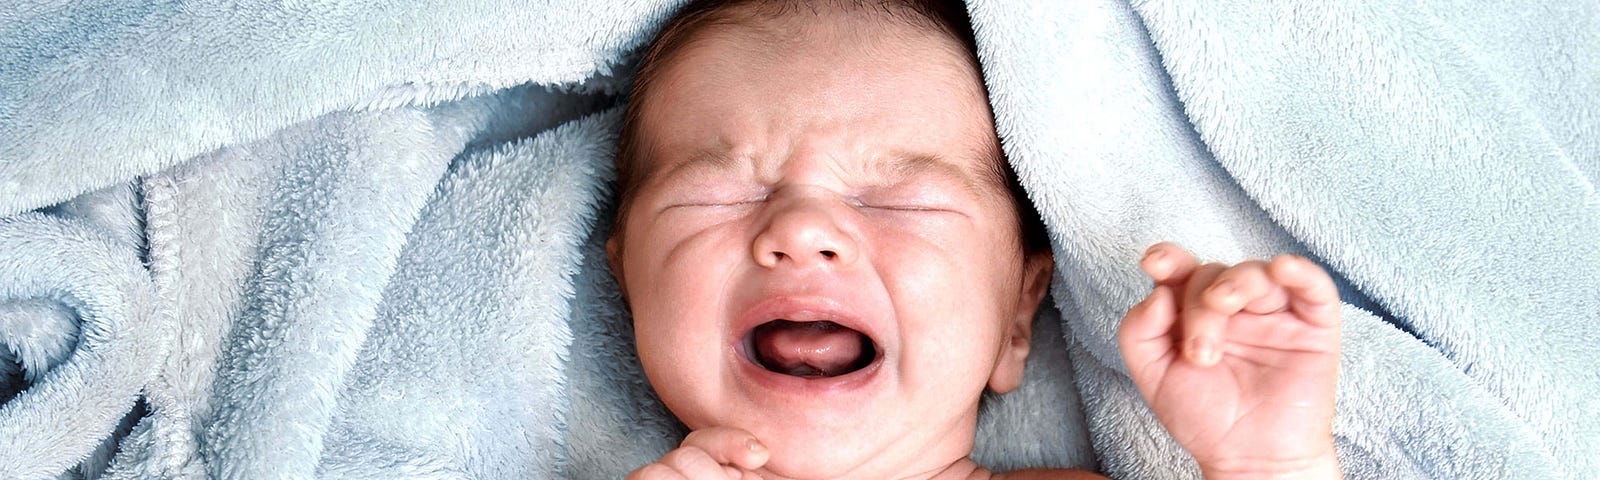 Newborn baby crying while laying on a light blue towel.